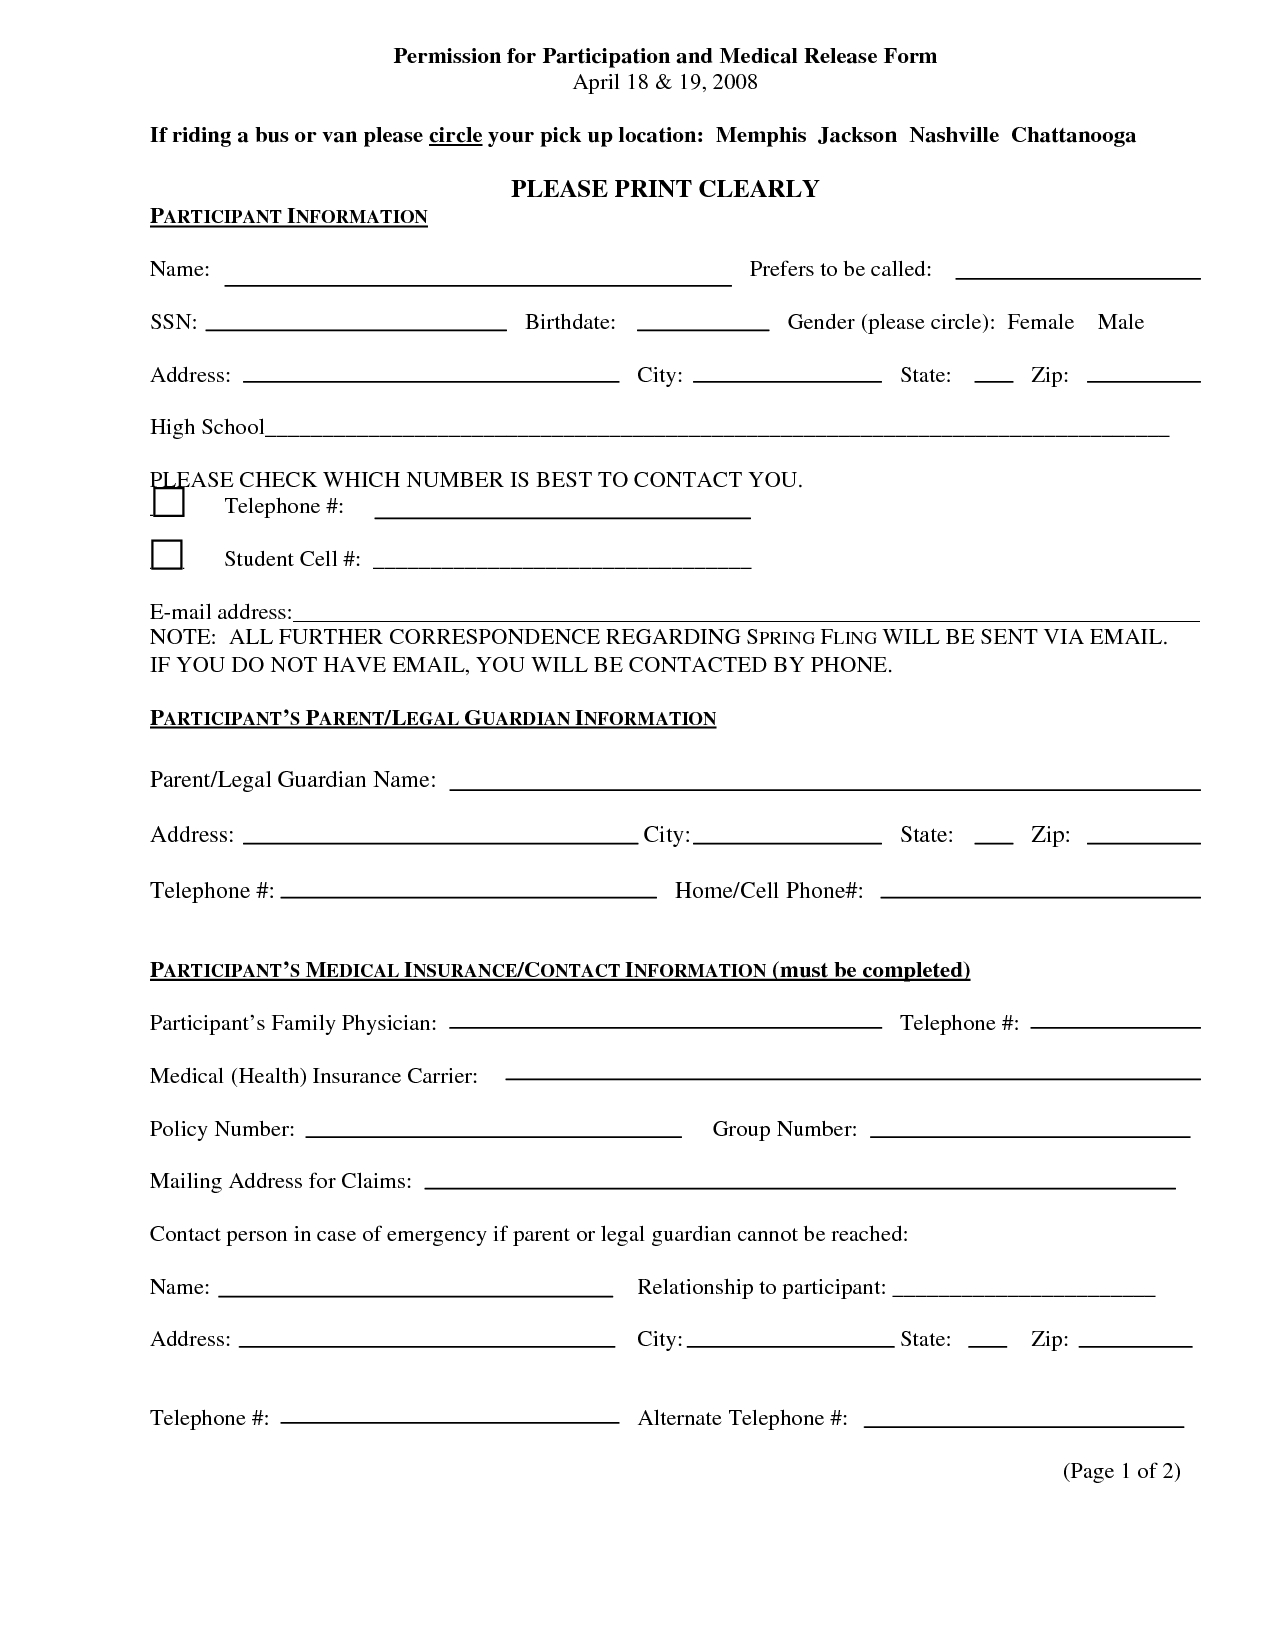 Pin On Pain No Gain - Free Printable Medical Release Form